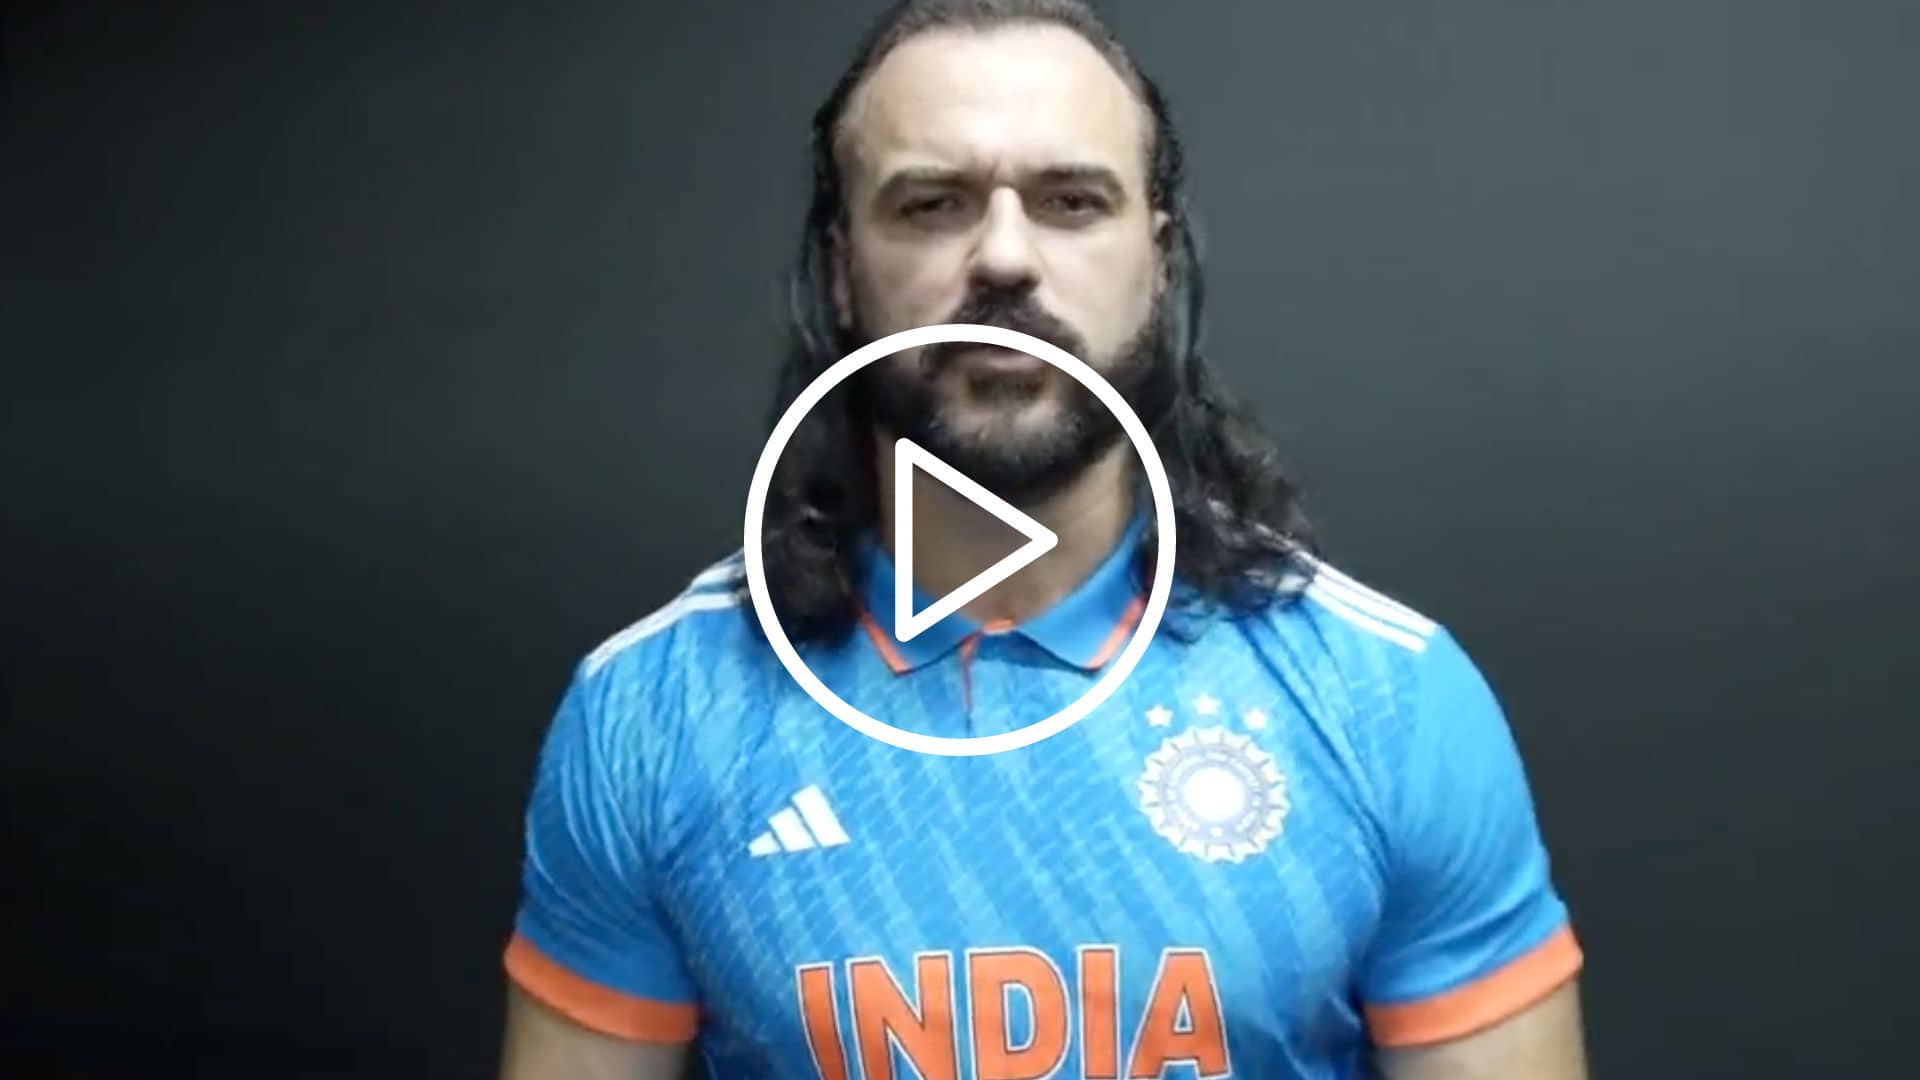 [Watch] WWE Superstar Drew McIntyre's Special Message To Indian Team For WC 2023